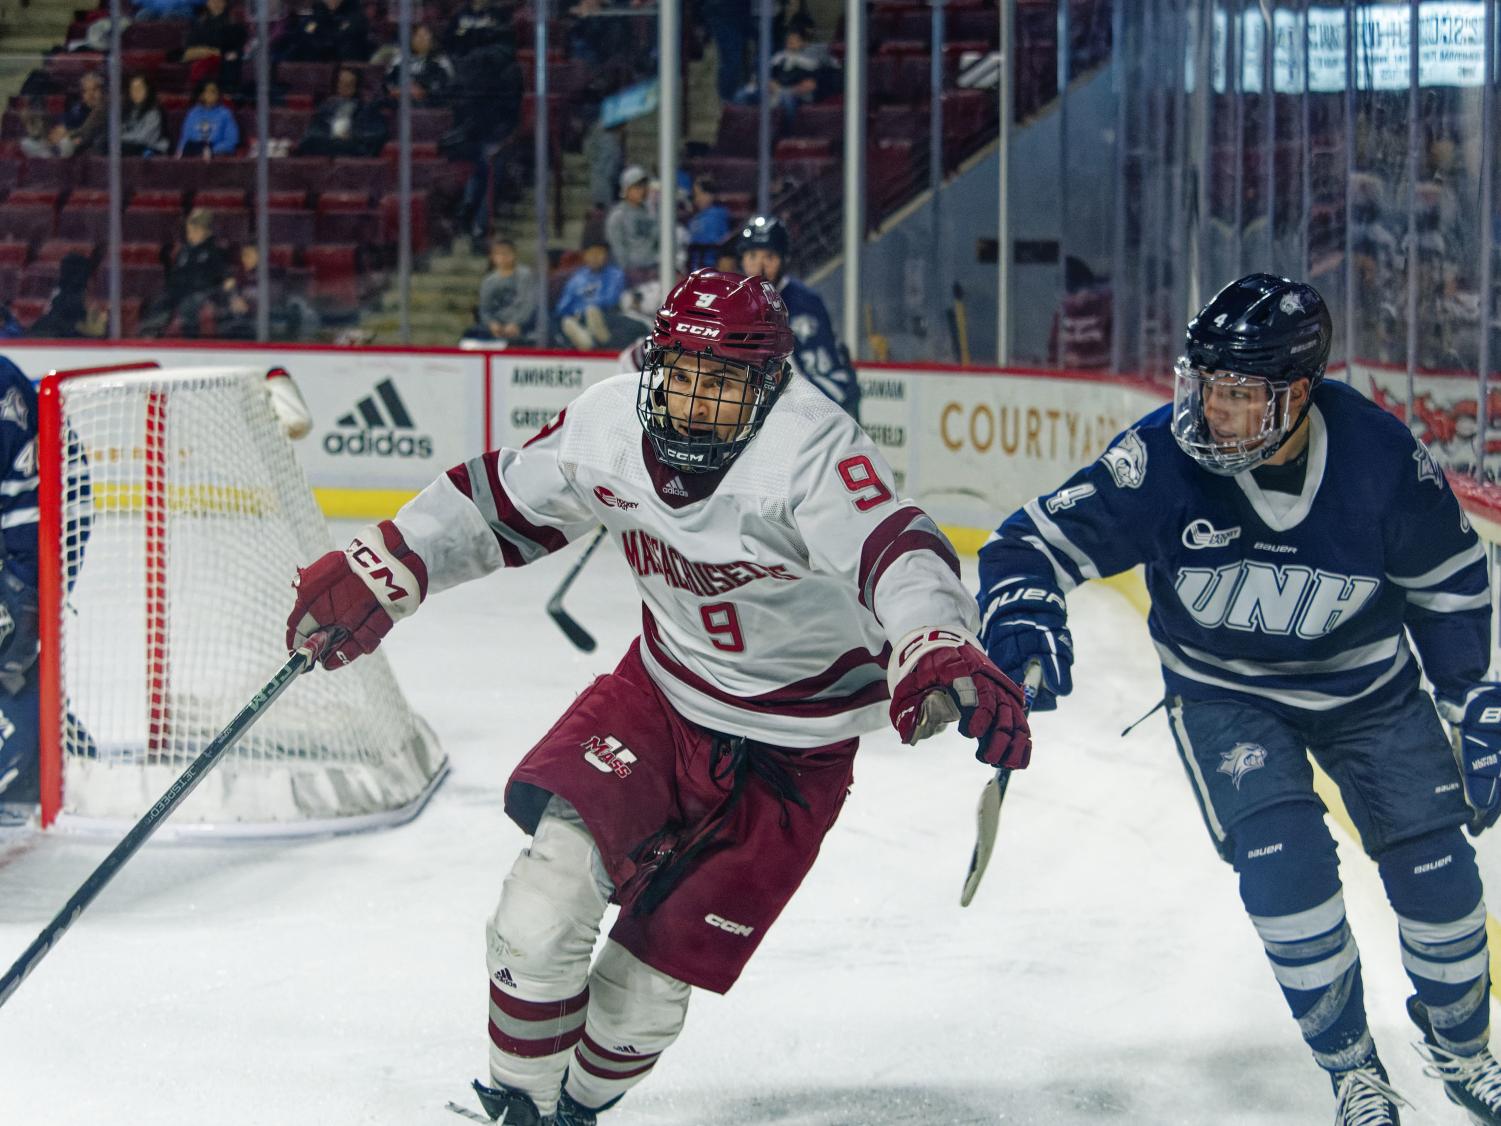 UMass moved into second place in Hockey East with a win.